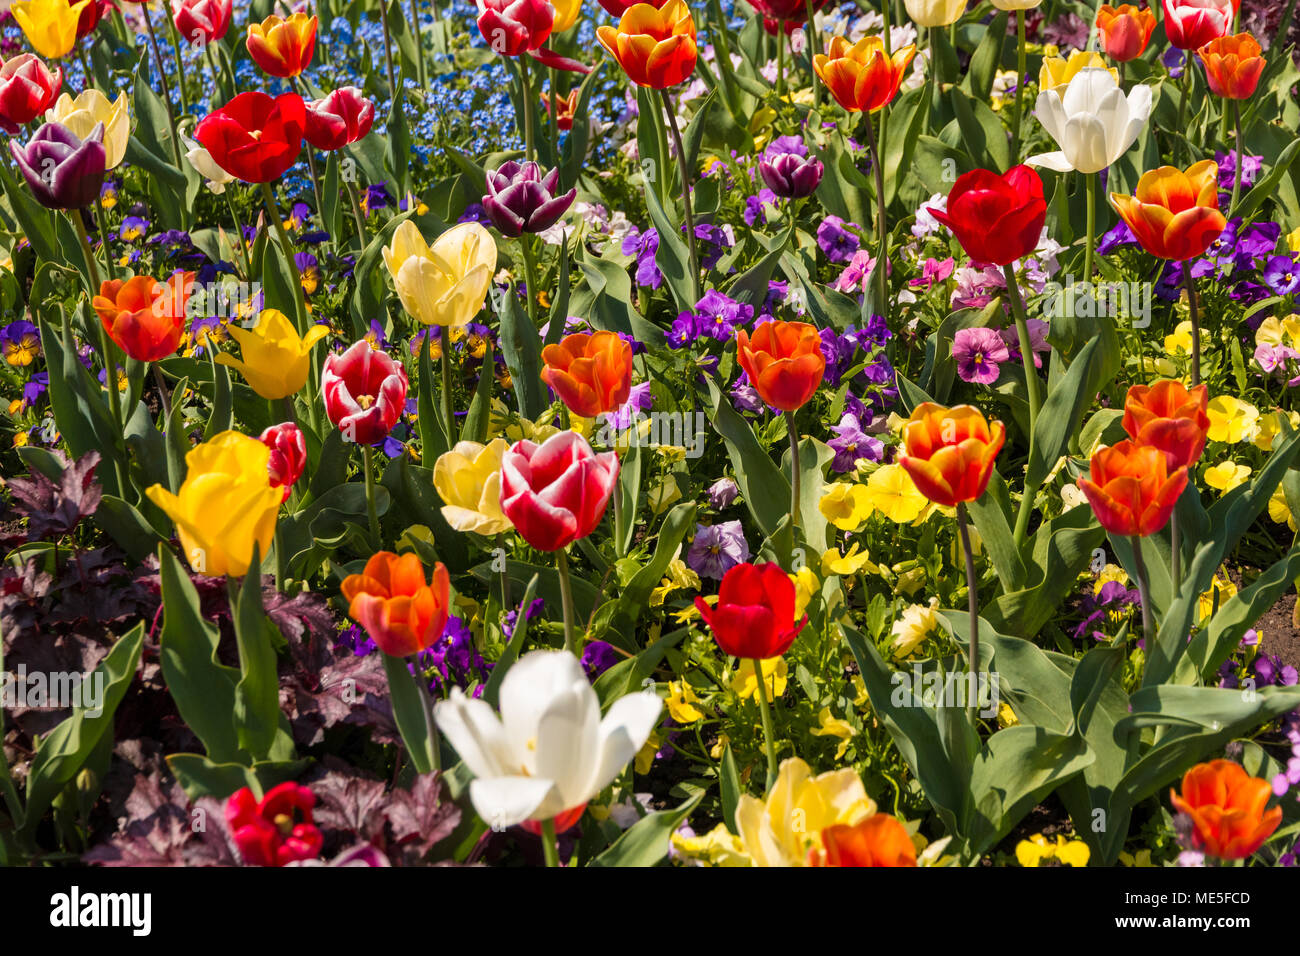 A nice colourful field full of purple, pink, yellow, red, orange and white garden pansies (Viola), tulips and blue forget-me-not flowers in springtime. Stock Photo